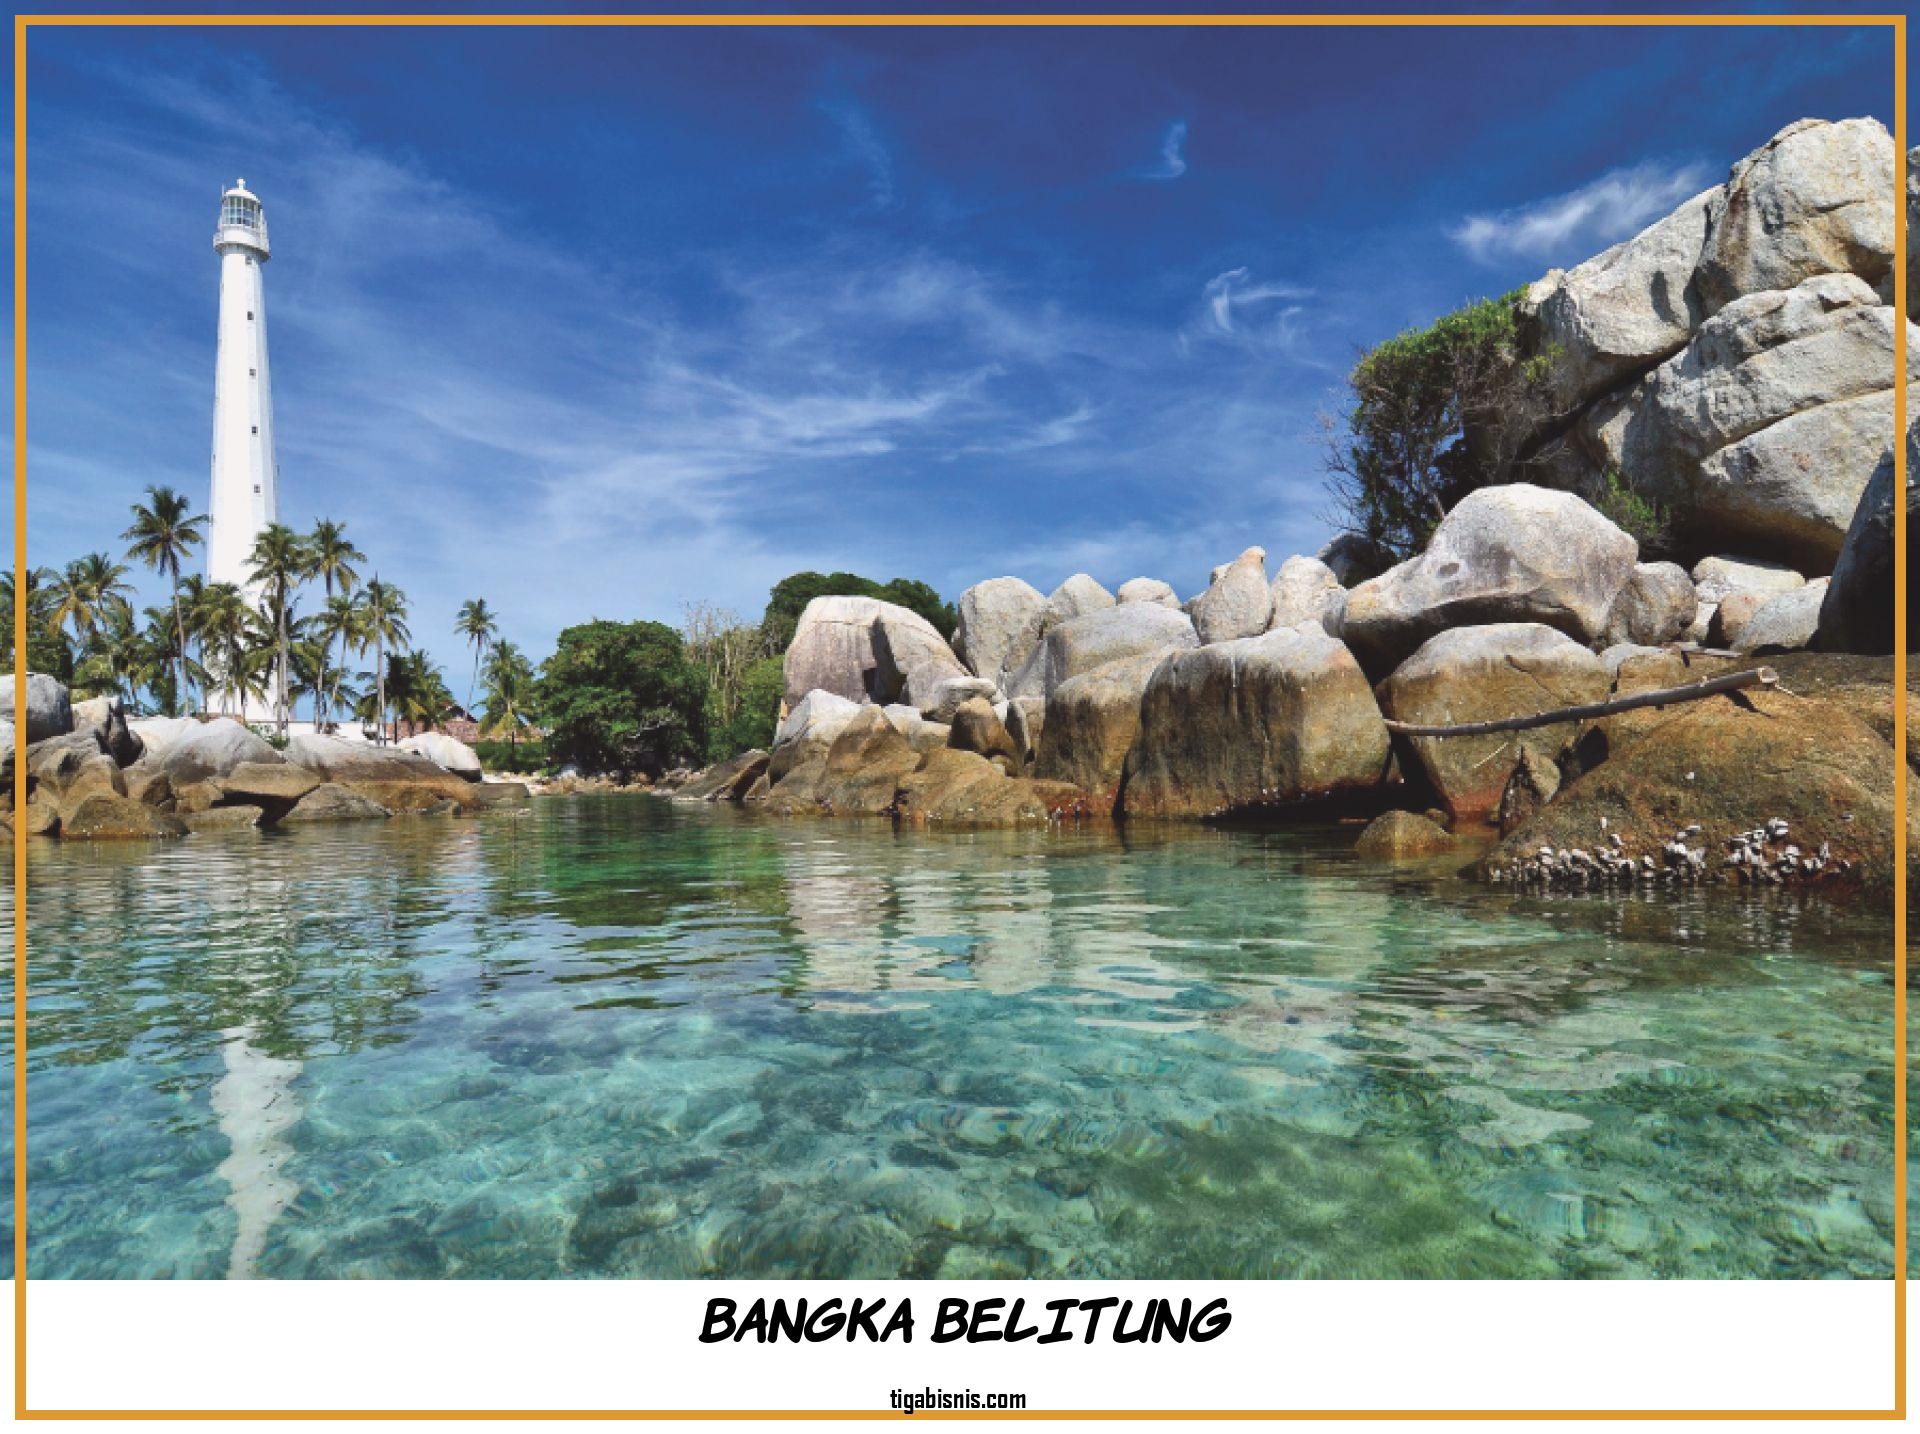 Info Lowongan Kerja Di area Bangka Belitung Saat Ini. Sumber : Https://www.quora.com/why-doesn-t-bangka-belitung-have-as-many-tourists-as-bali-even-though-it-is-also-a-wonderful-exotic-place-in-indonesia